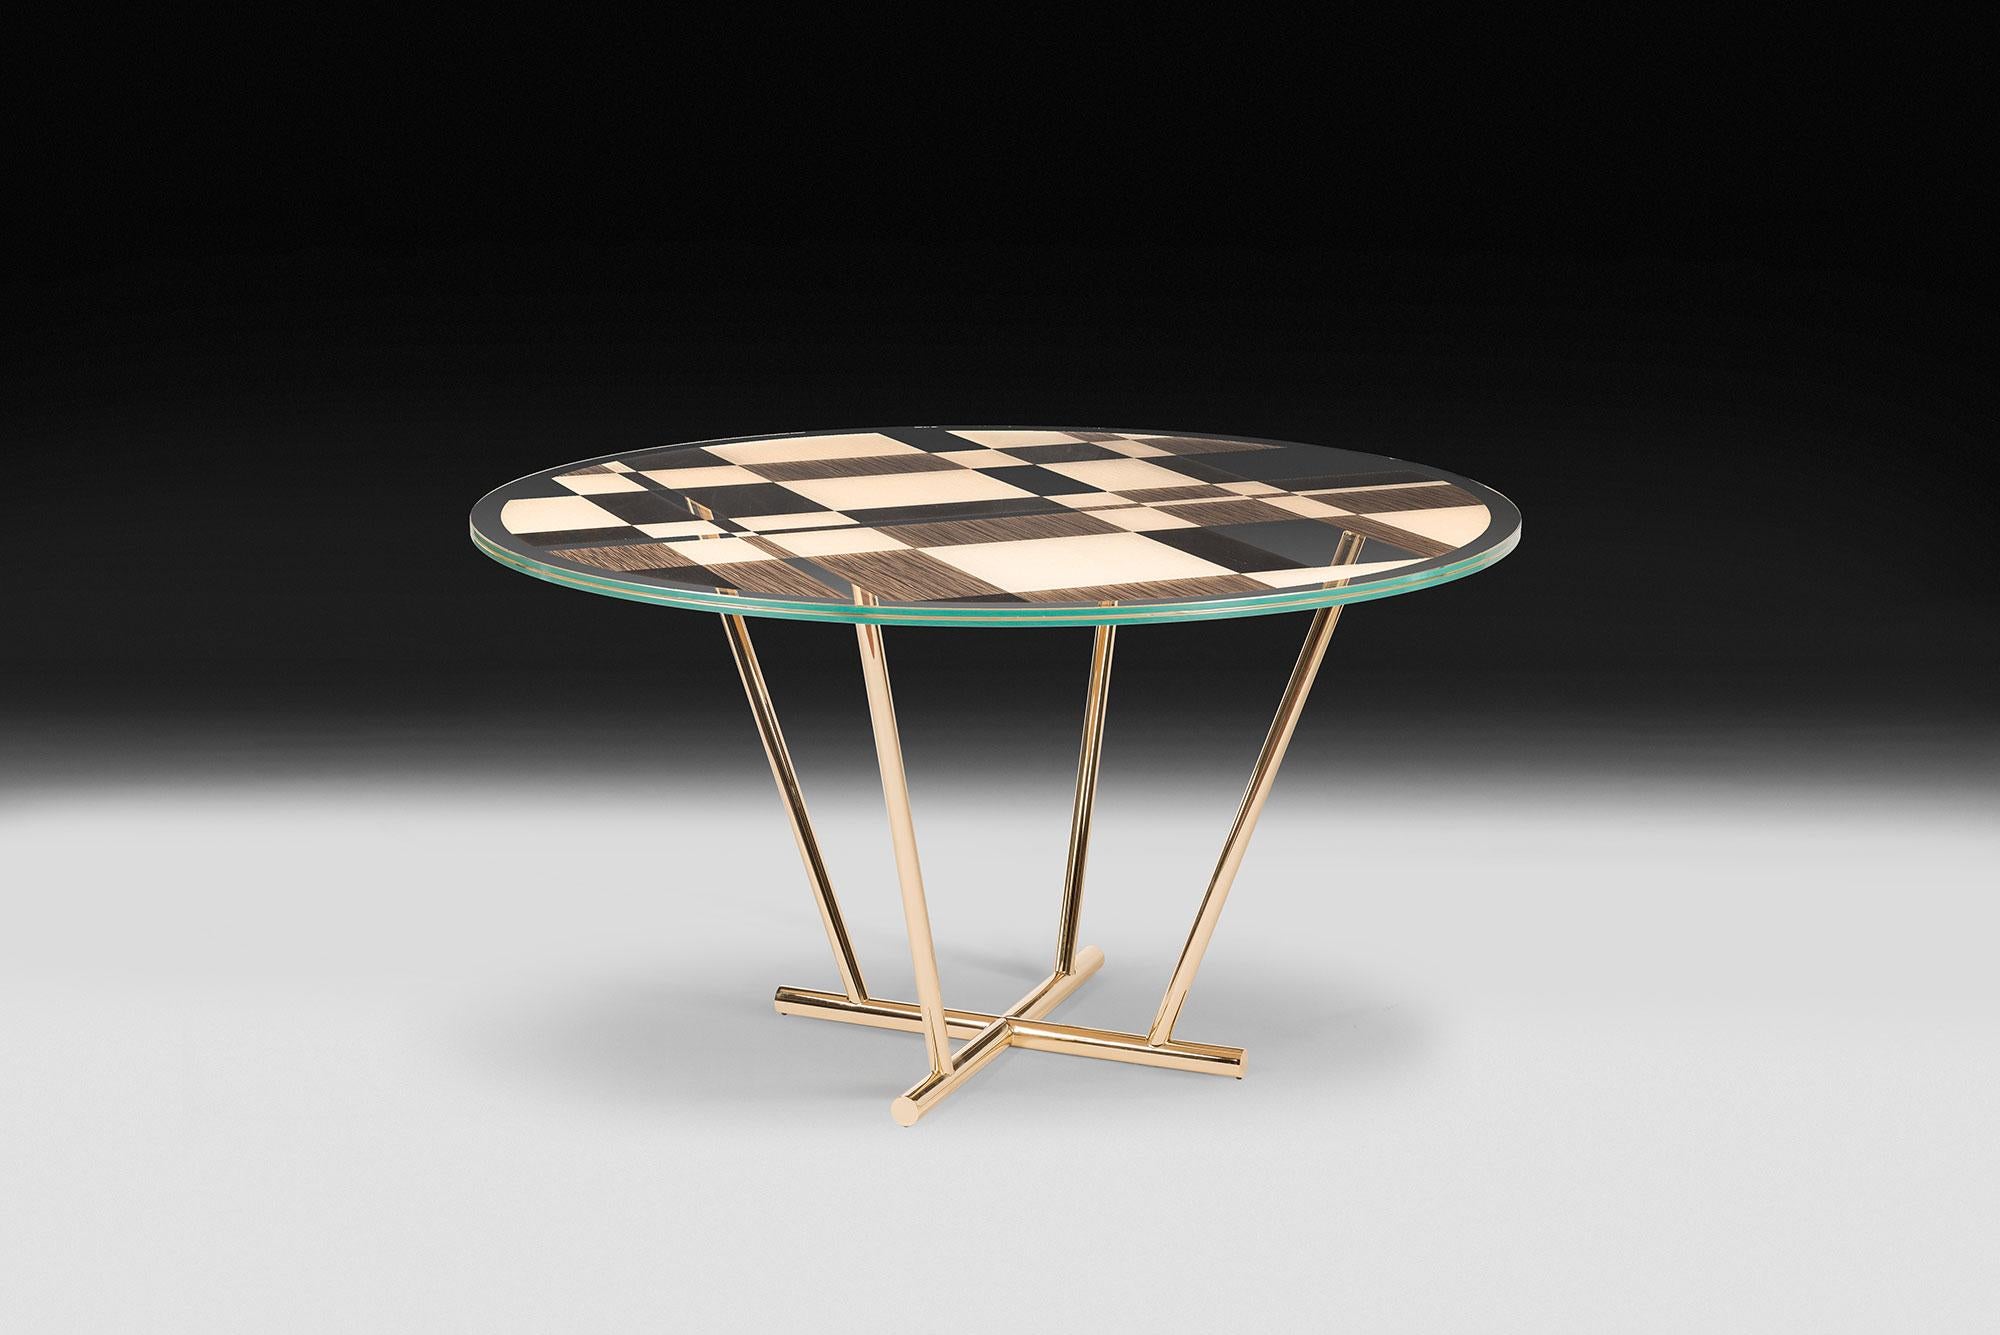 Round-shaped table, featured by a modern elegant design, inspired by the pictures of the famous Dutch painter Piet Mondrian and his usual geometries.

Part of unNatural collection, it comes out from a research on natural phenomena as well as